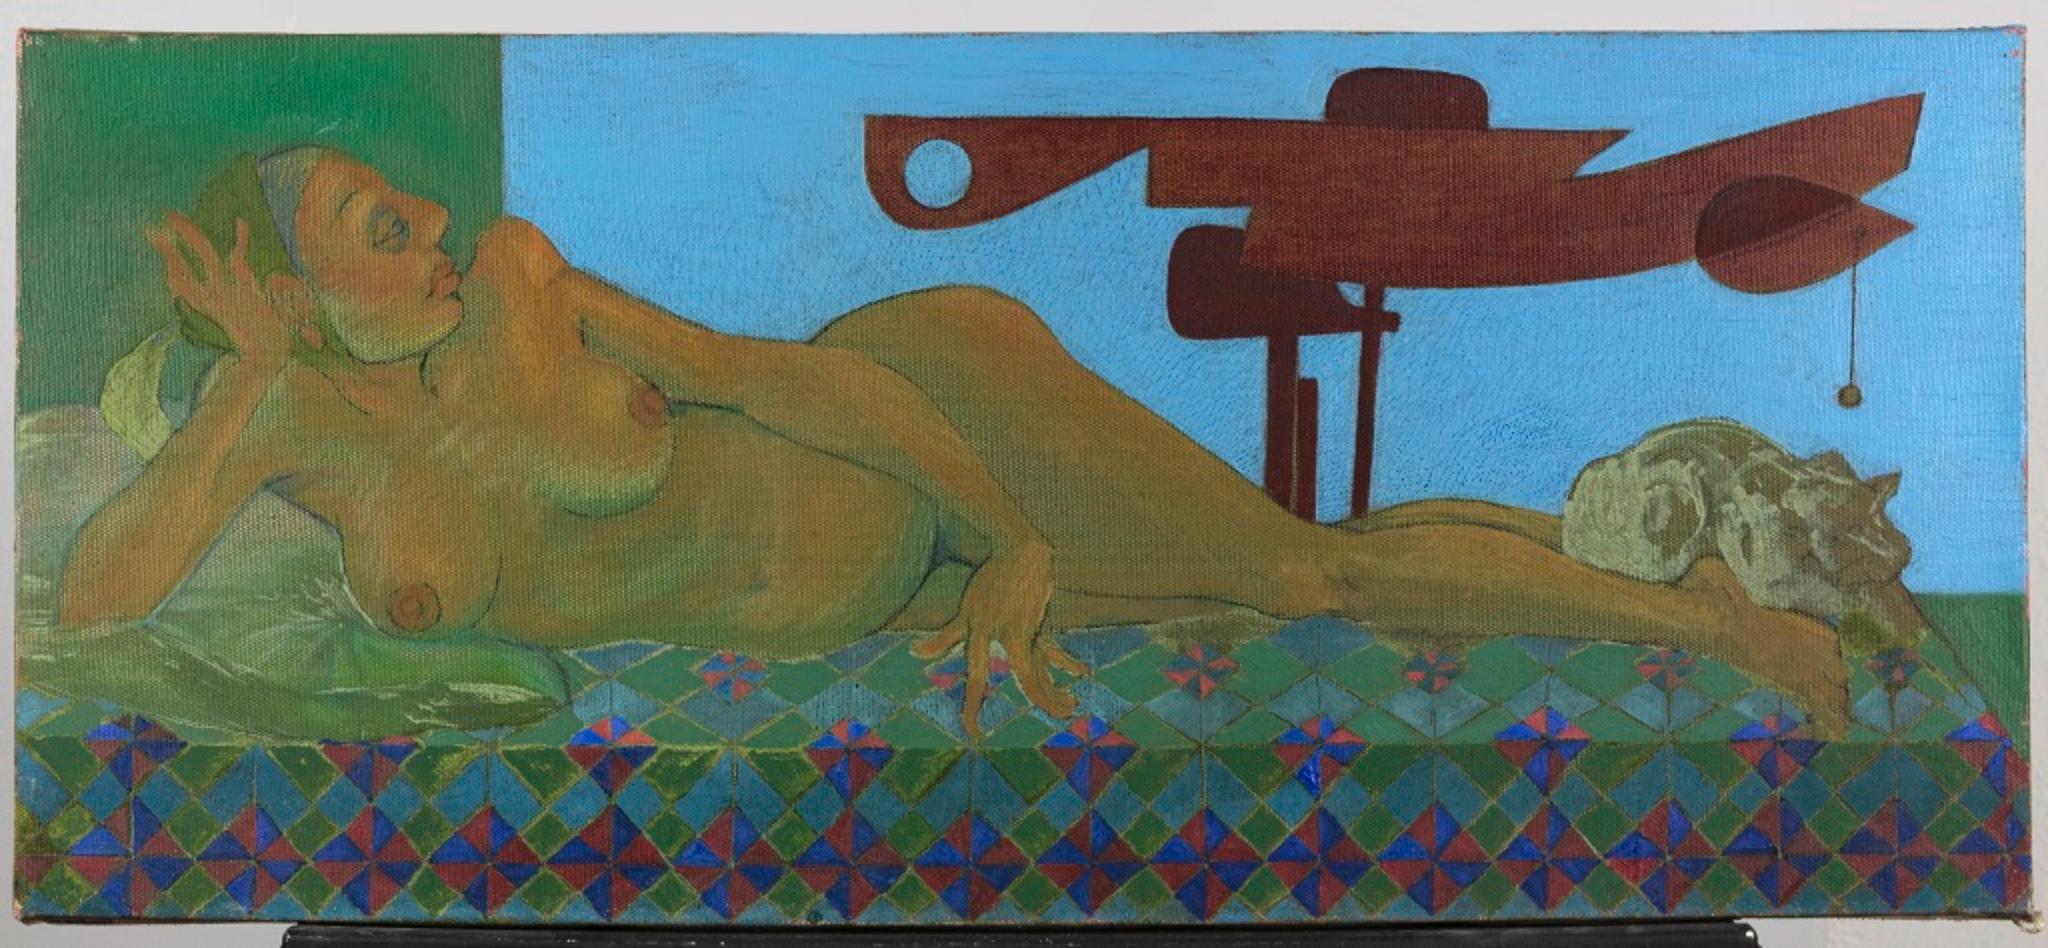 Lying Nude with Signals 1 - Oil Paint on Canvas by Leo Guida - 1988 For Sale 1